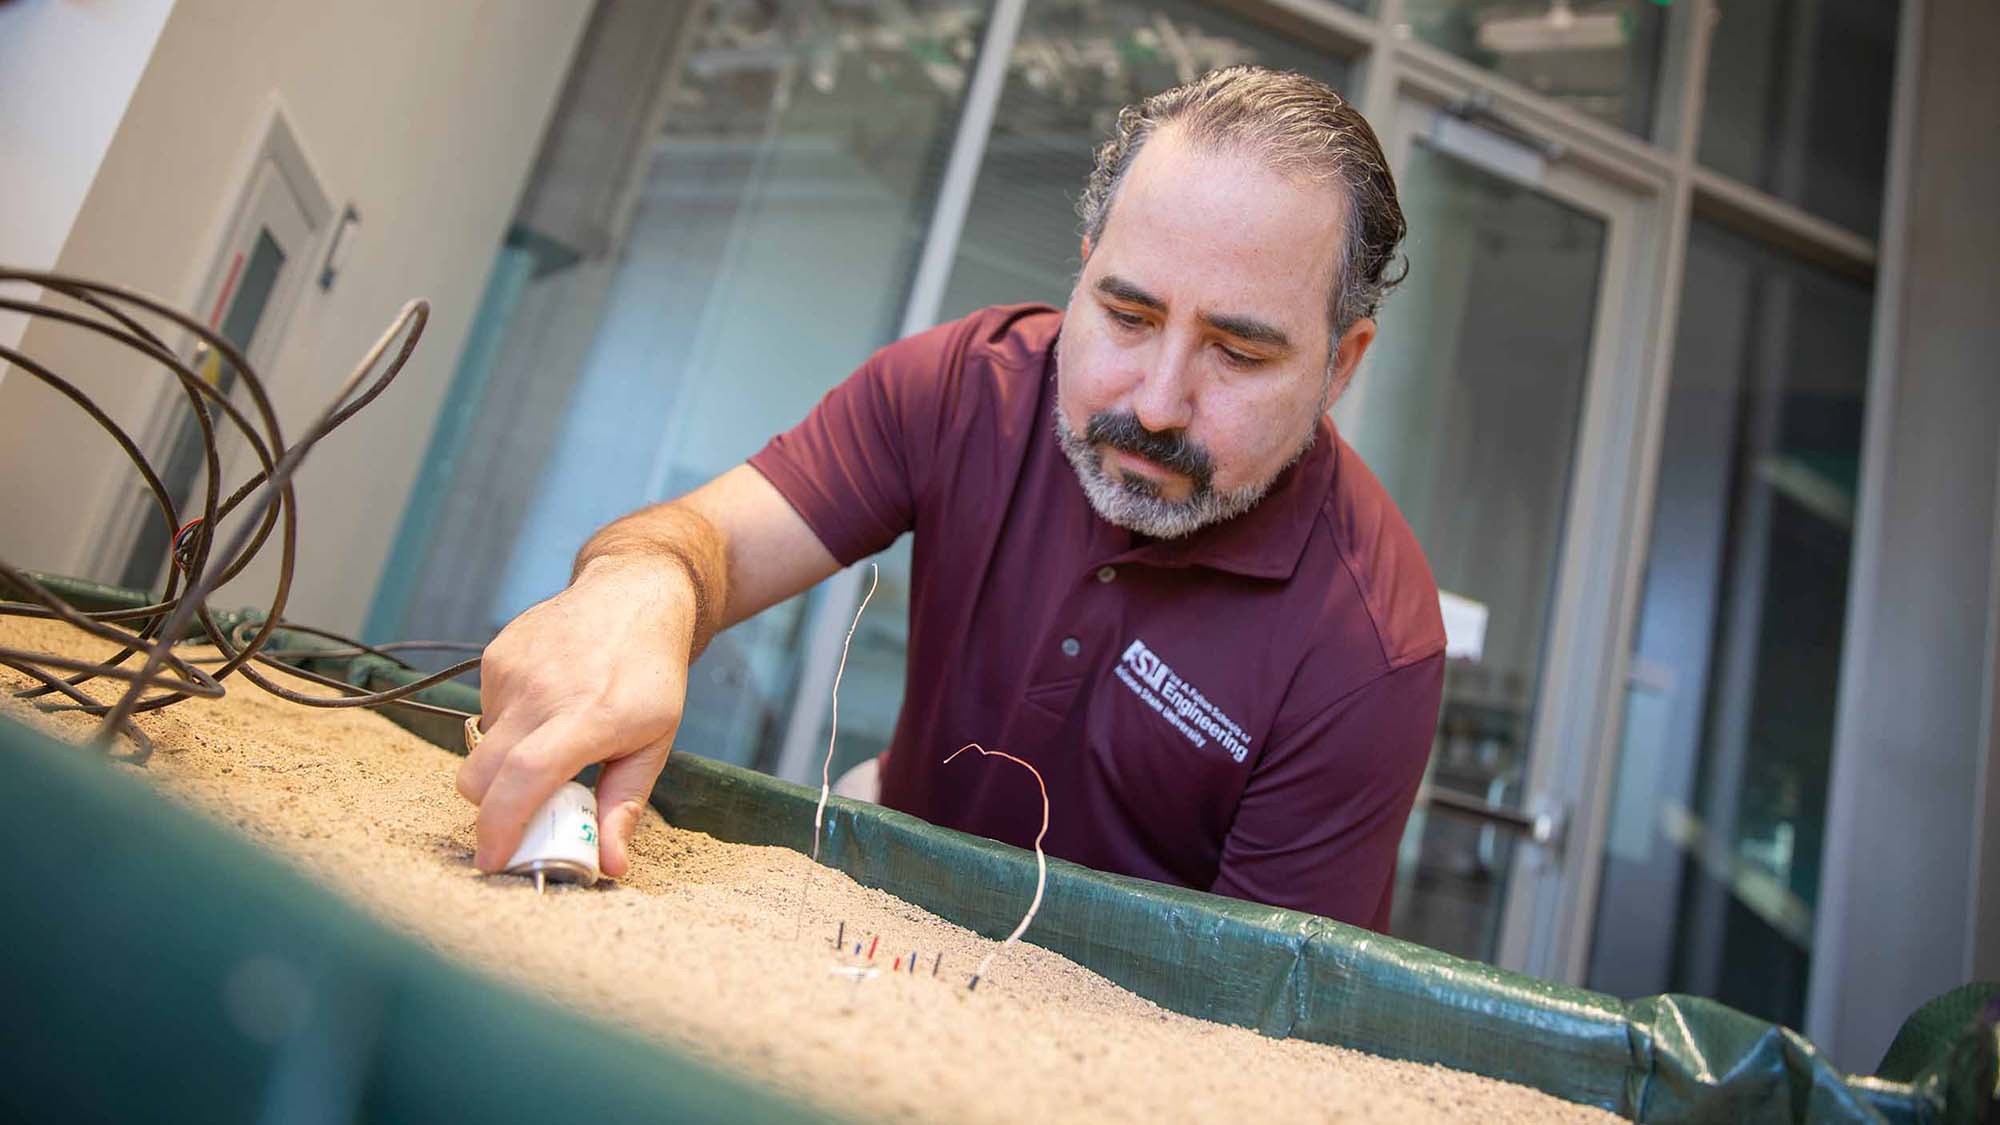 Enrique Vivoni holds an electronic sensor in a container of sand, measuring the water content.